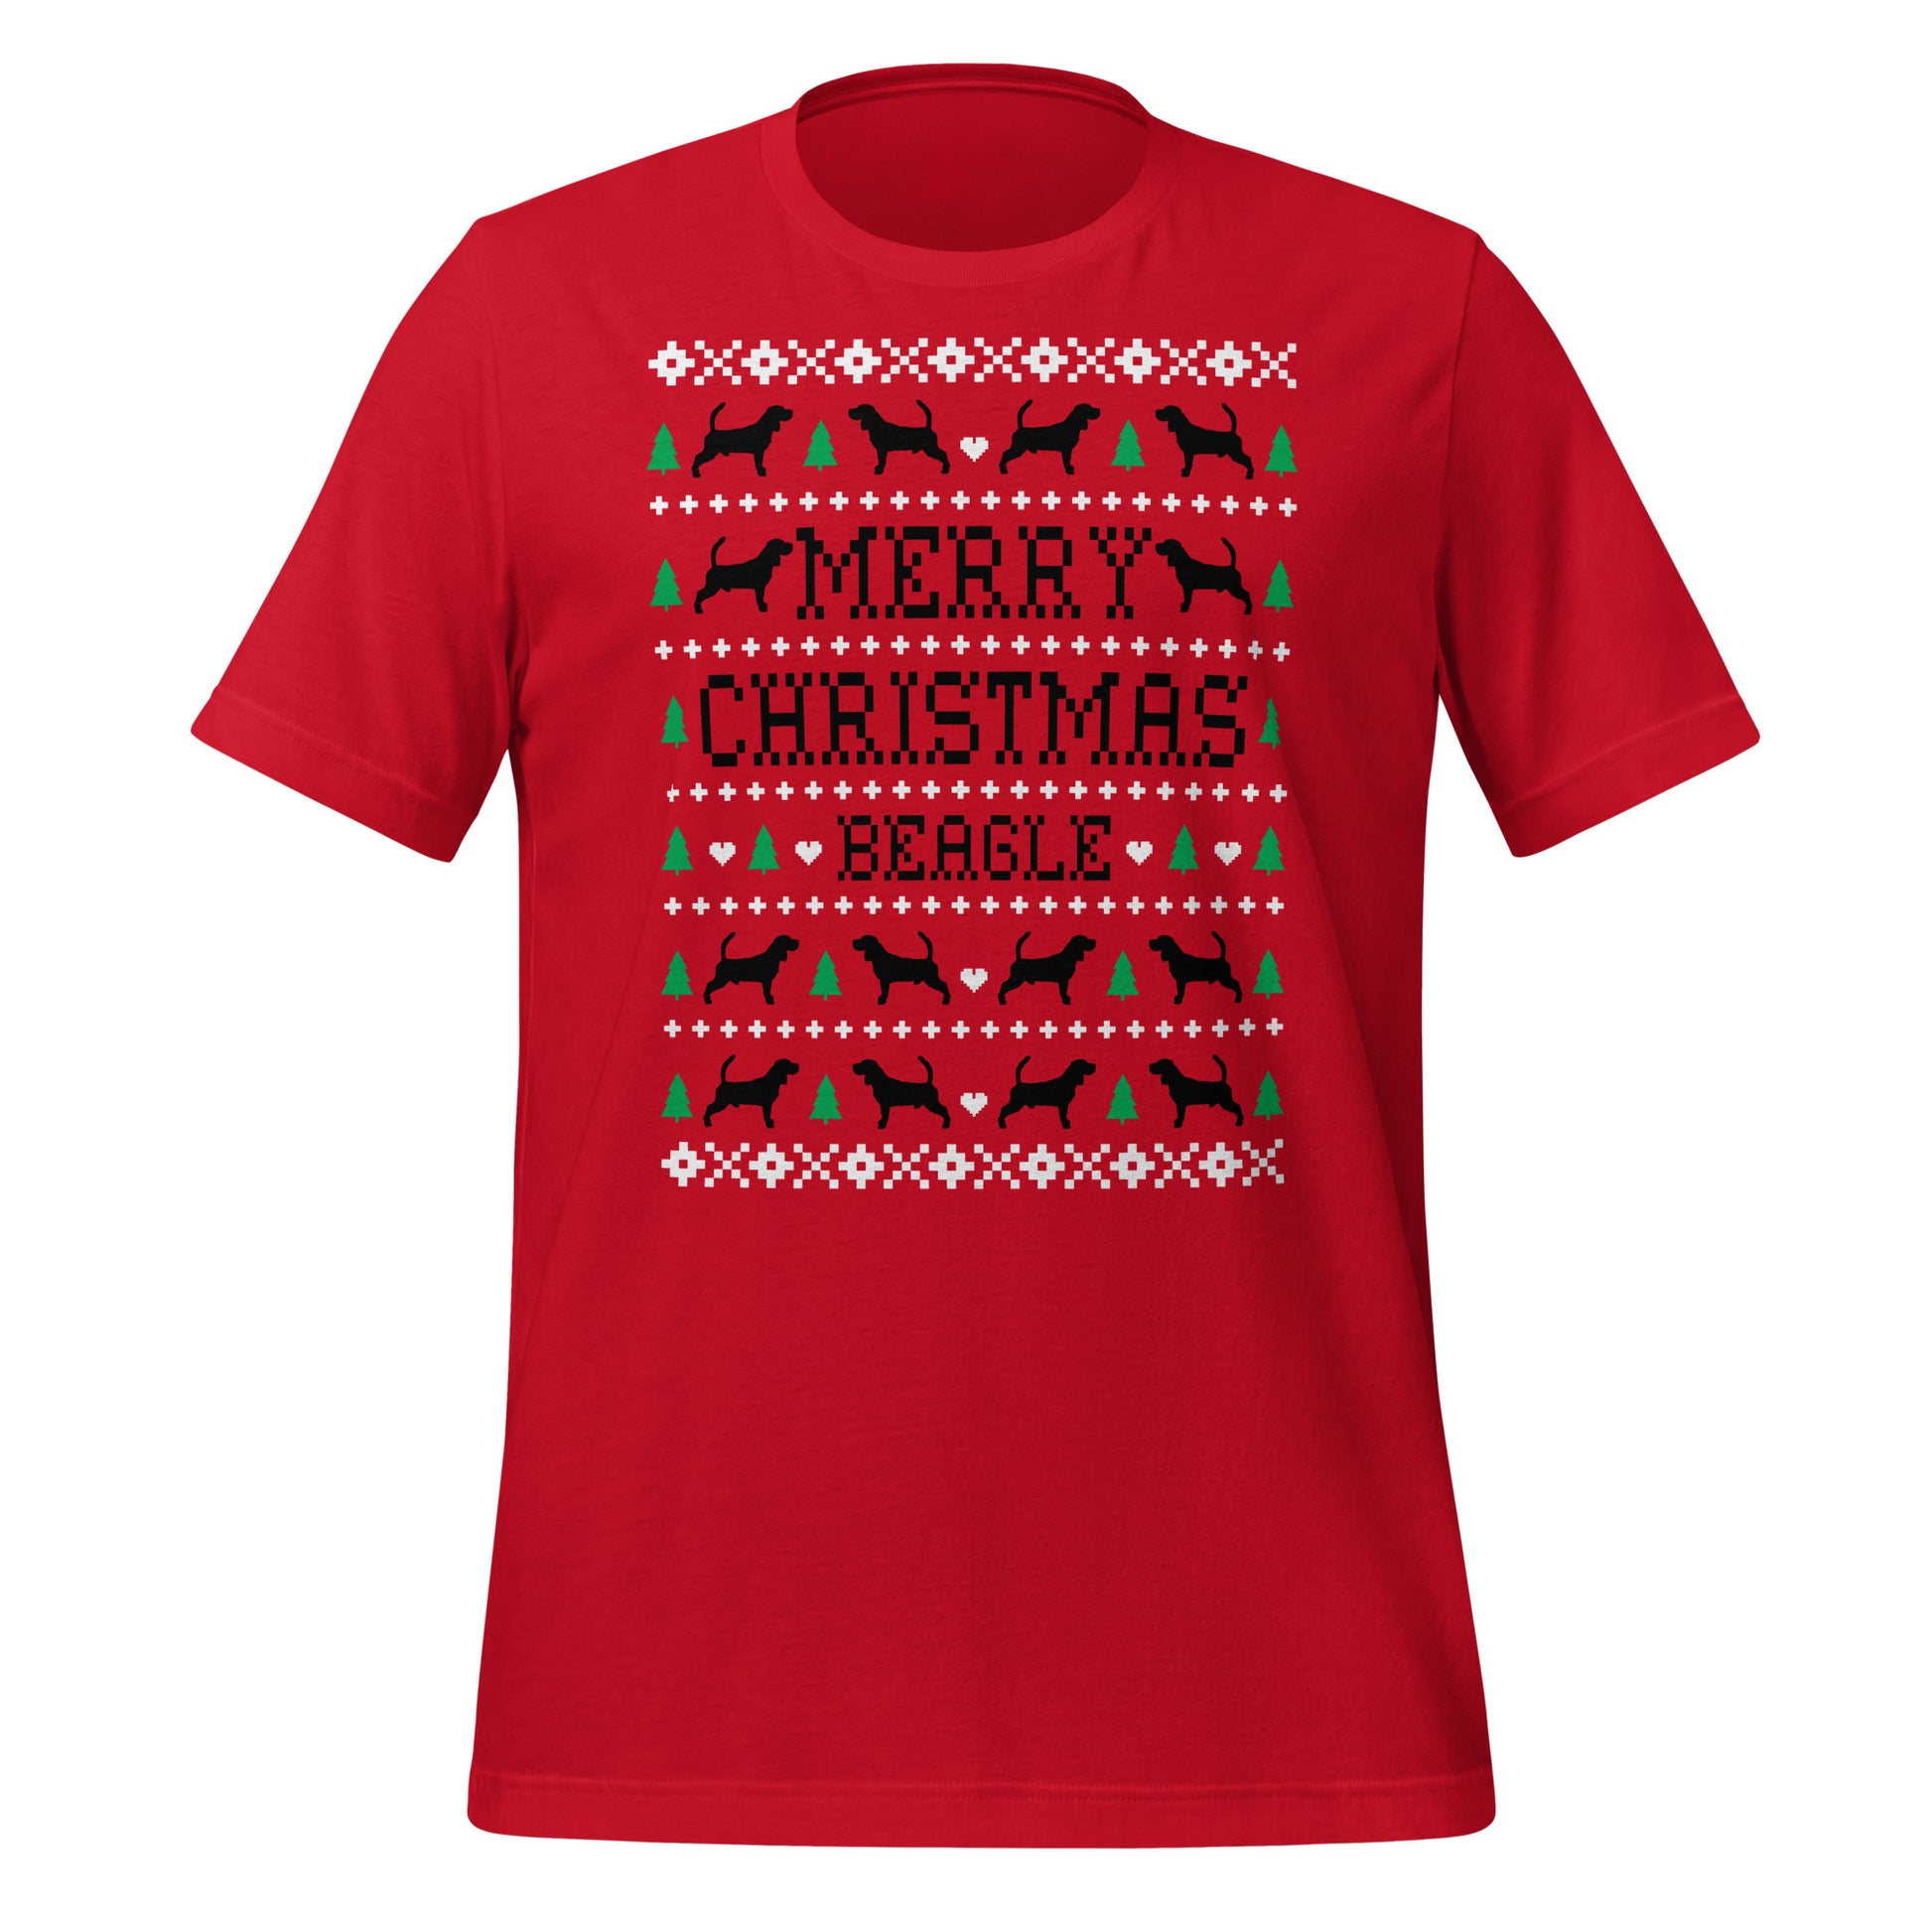 Beagle Ugly Christmas t-shirt red by Dog Artistry.